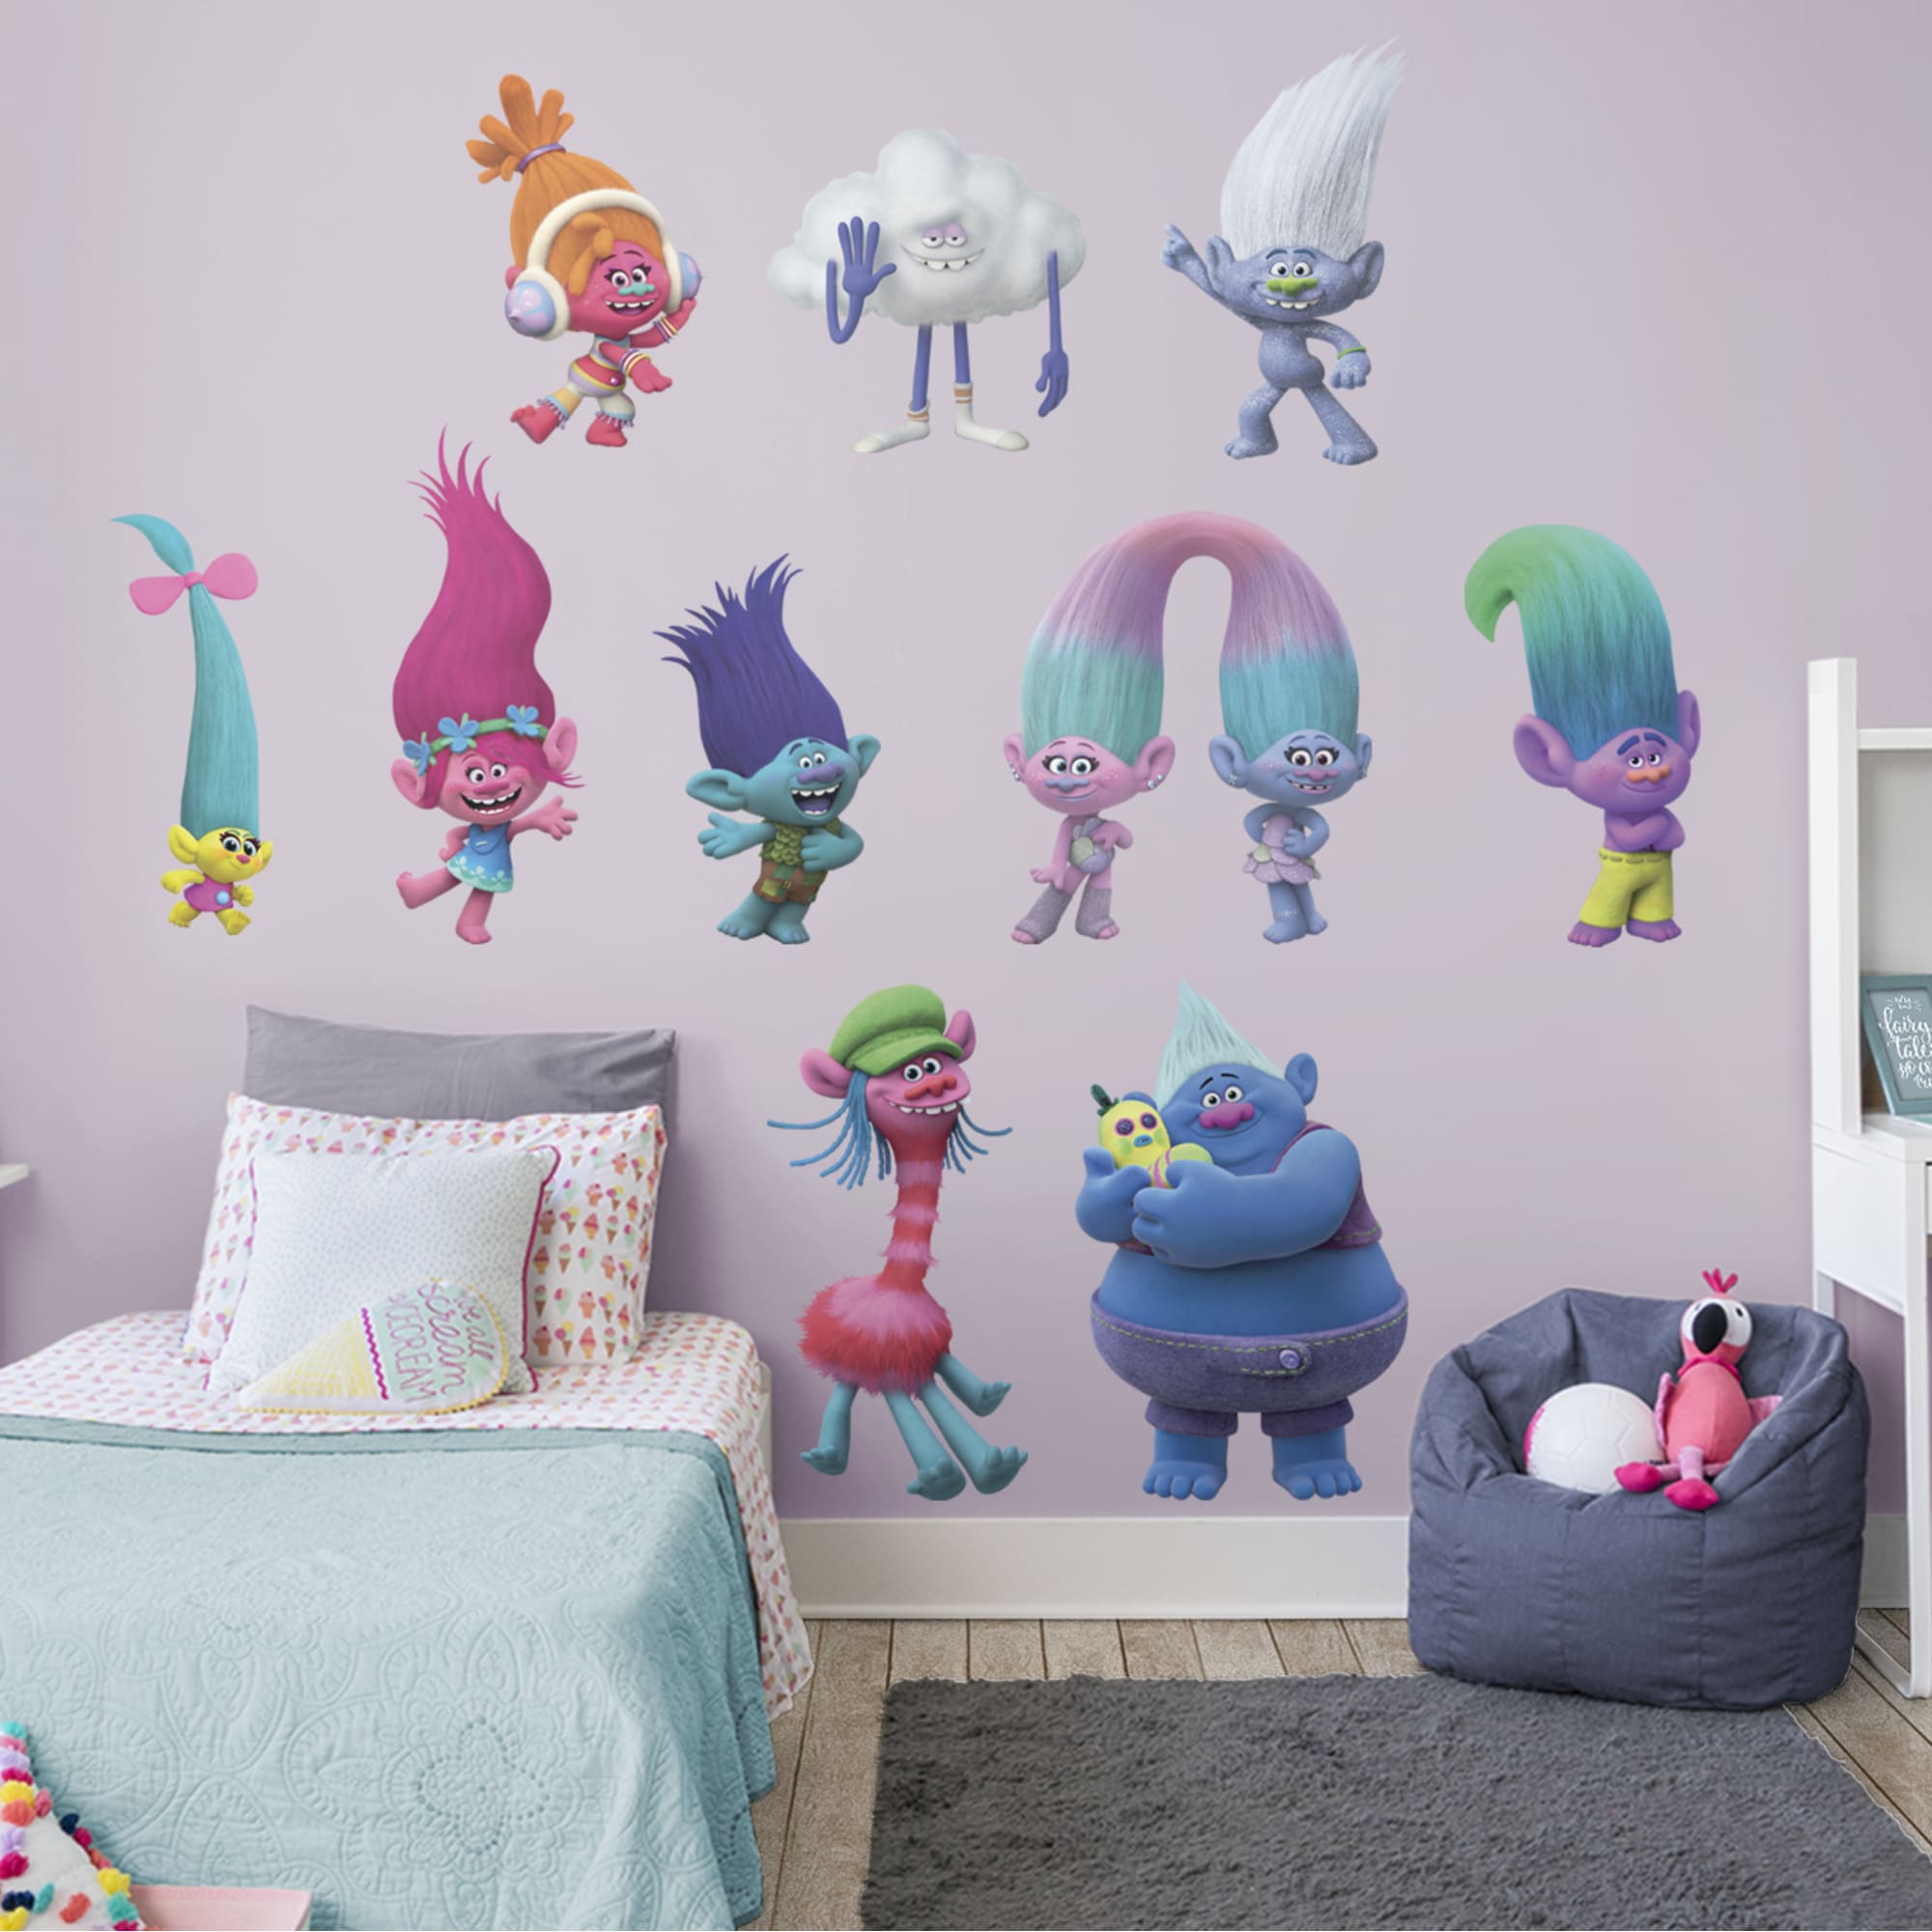 Trolls: Movie Collection - Officially Licensed Removable Wall Decal 20.0"W x 25.0"H by Fathead | Vinyl